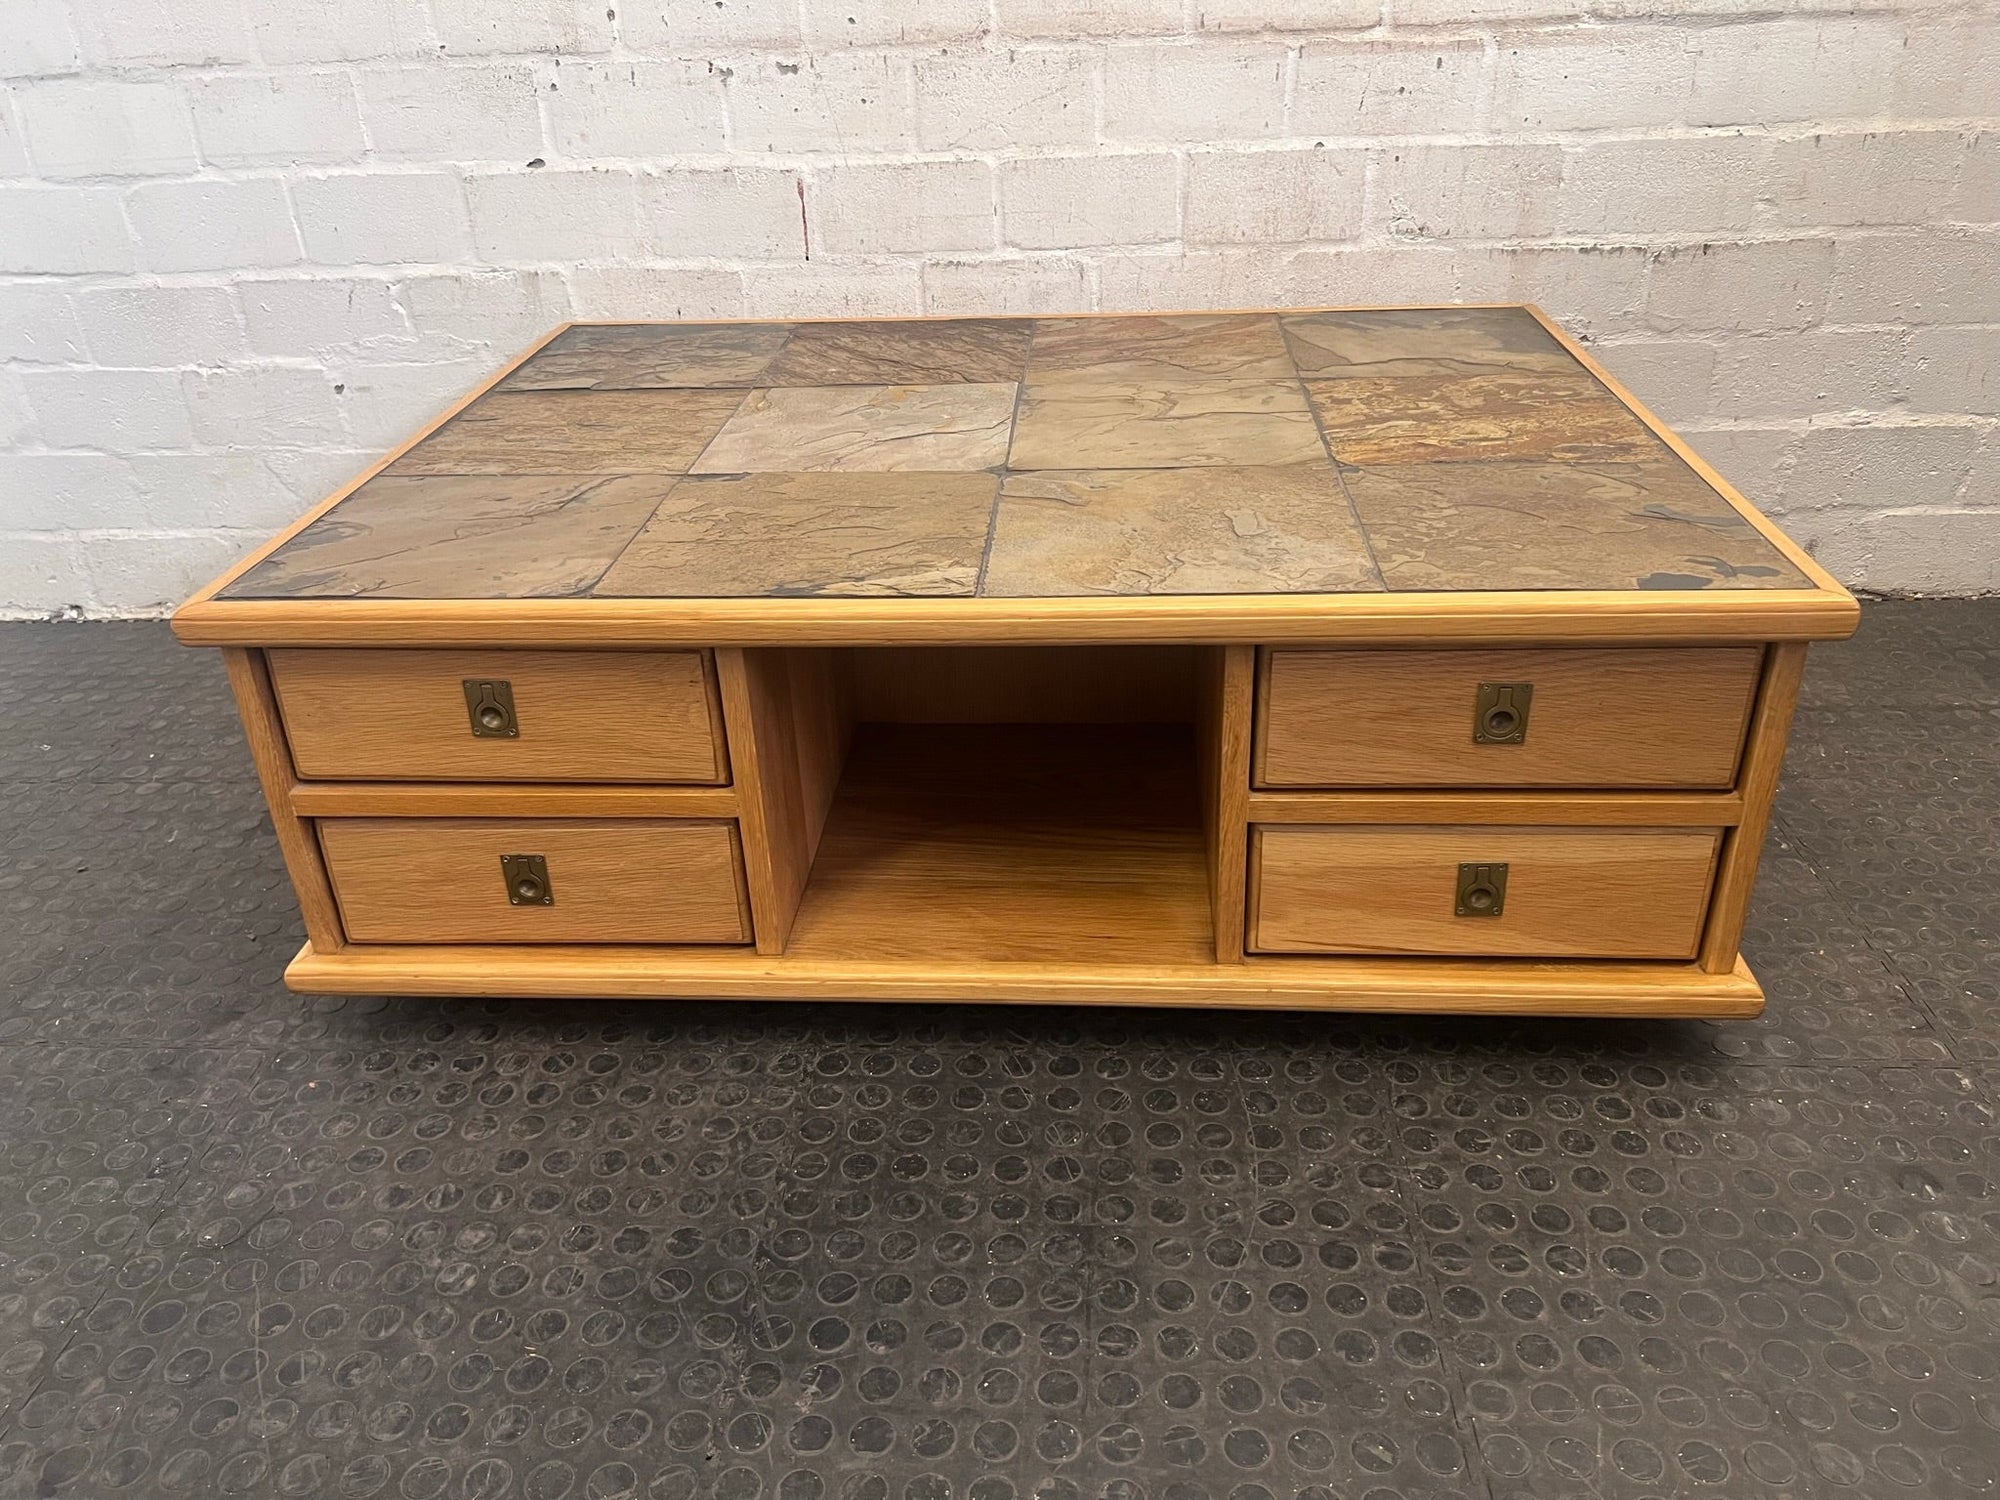 Large Wooden Six Drawer Coffee Table with Tiled Top - REDUCED